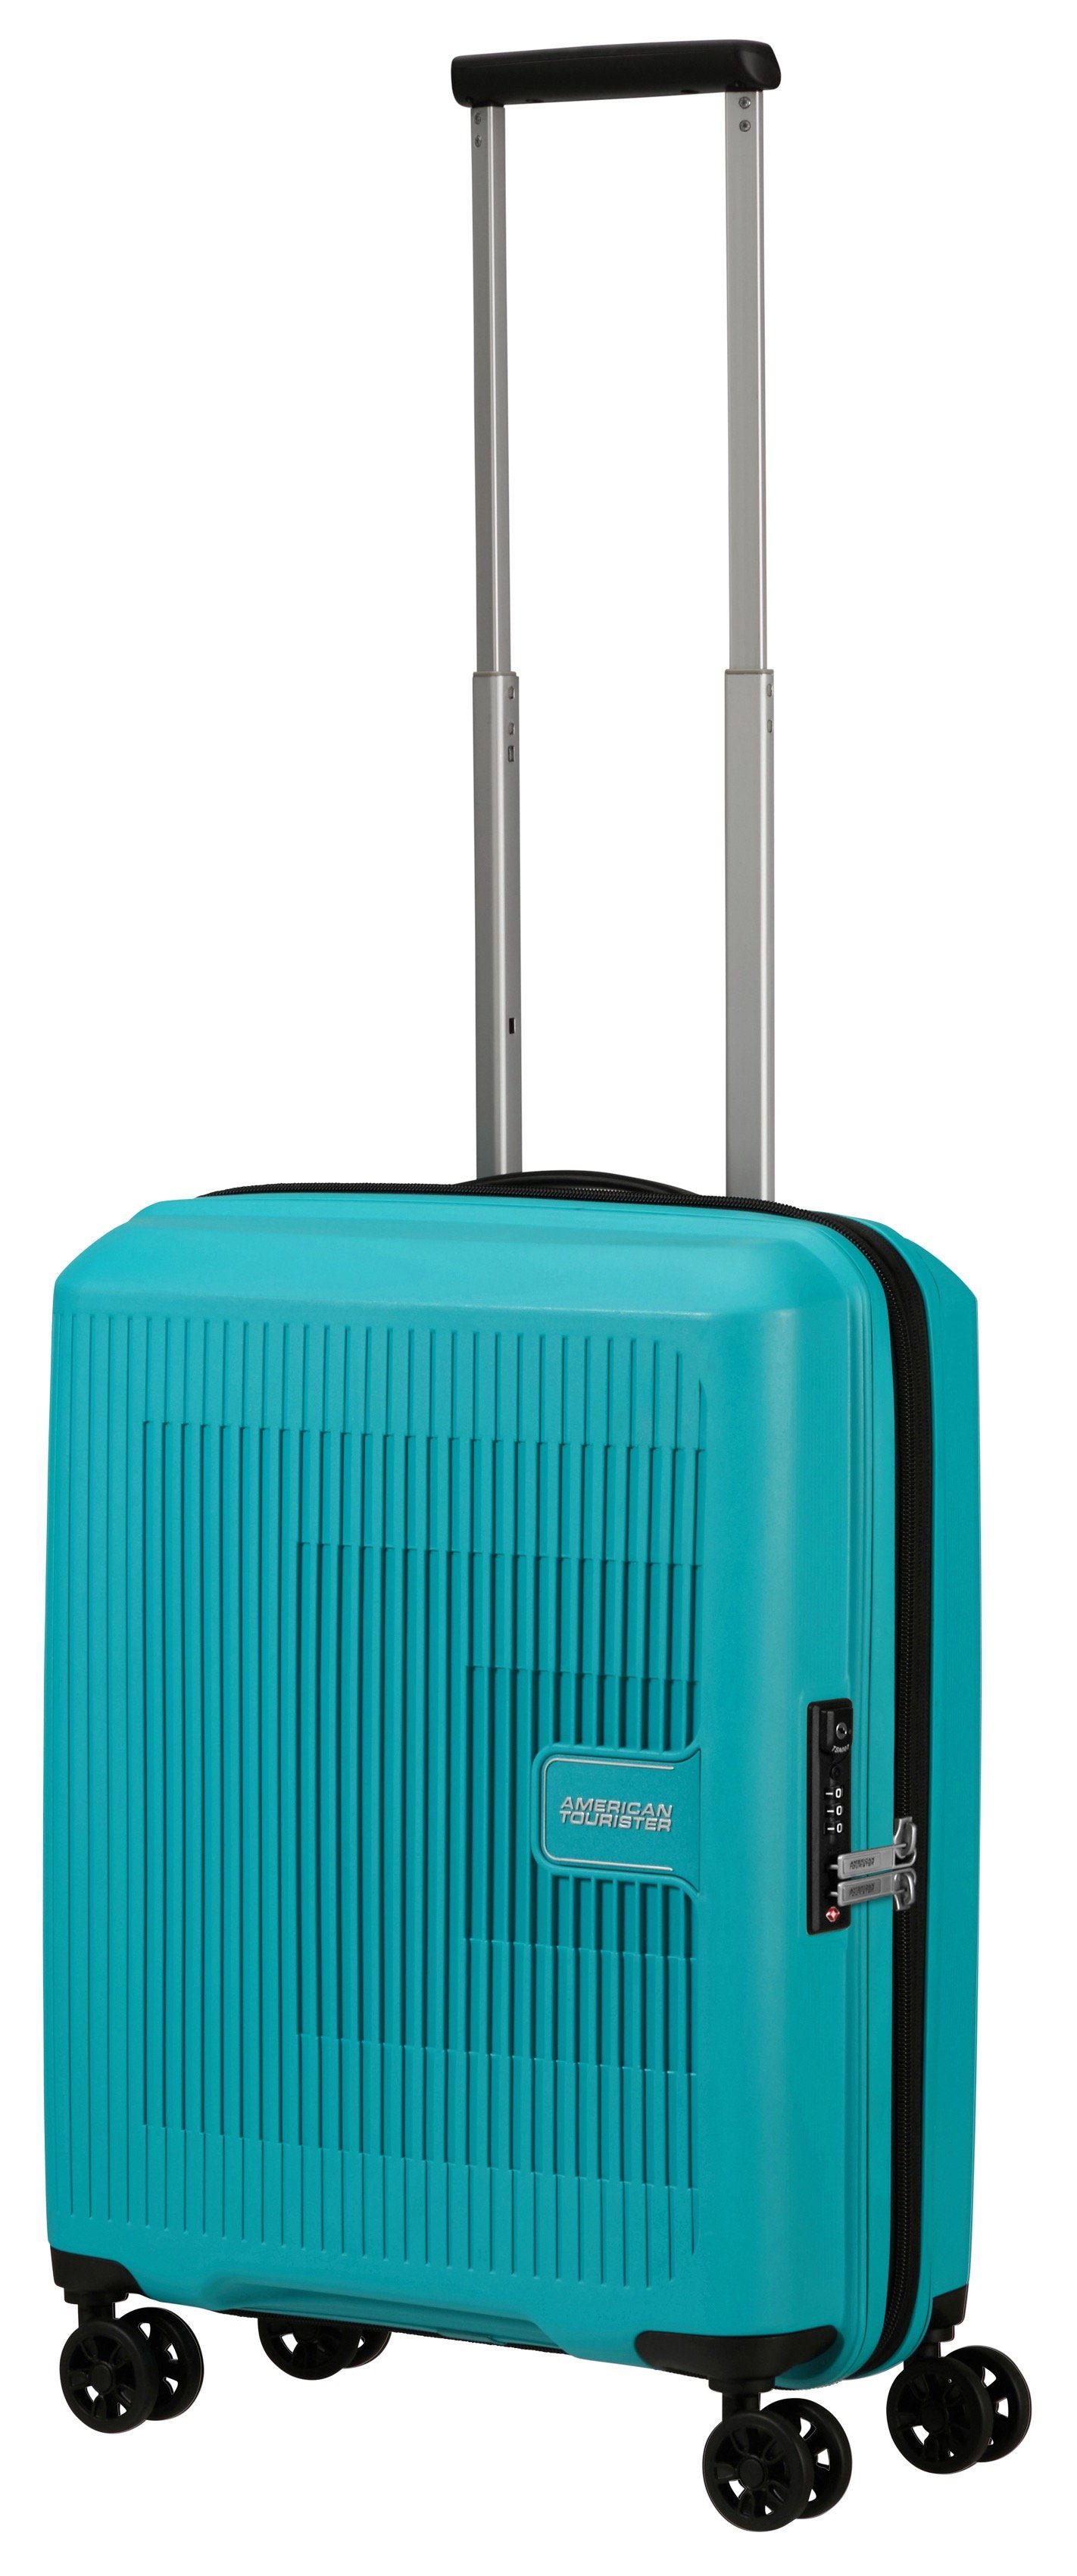 American Tourister® Koffer Spinner turquoise 4 AEROSTEP Rollen 55 exp, tonic